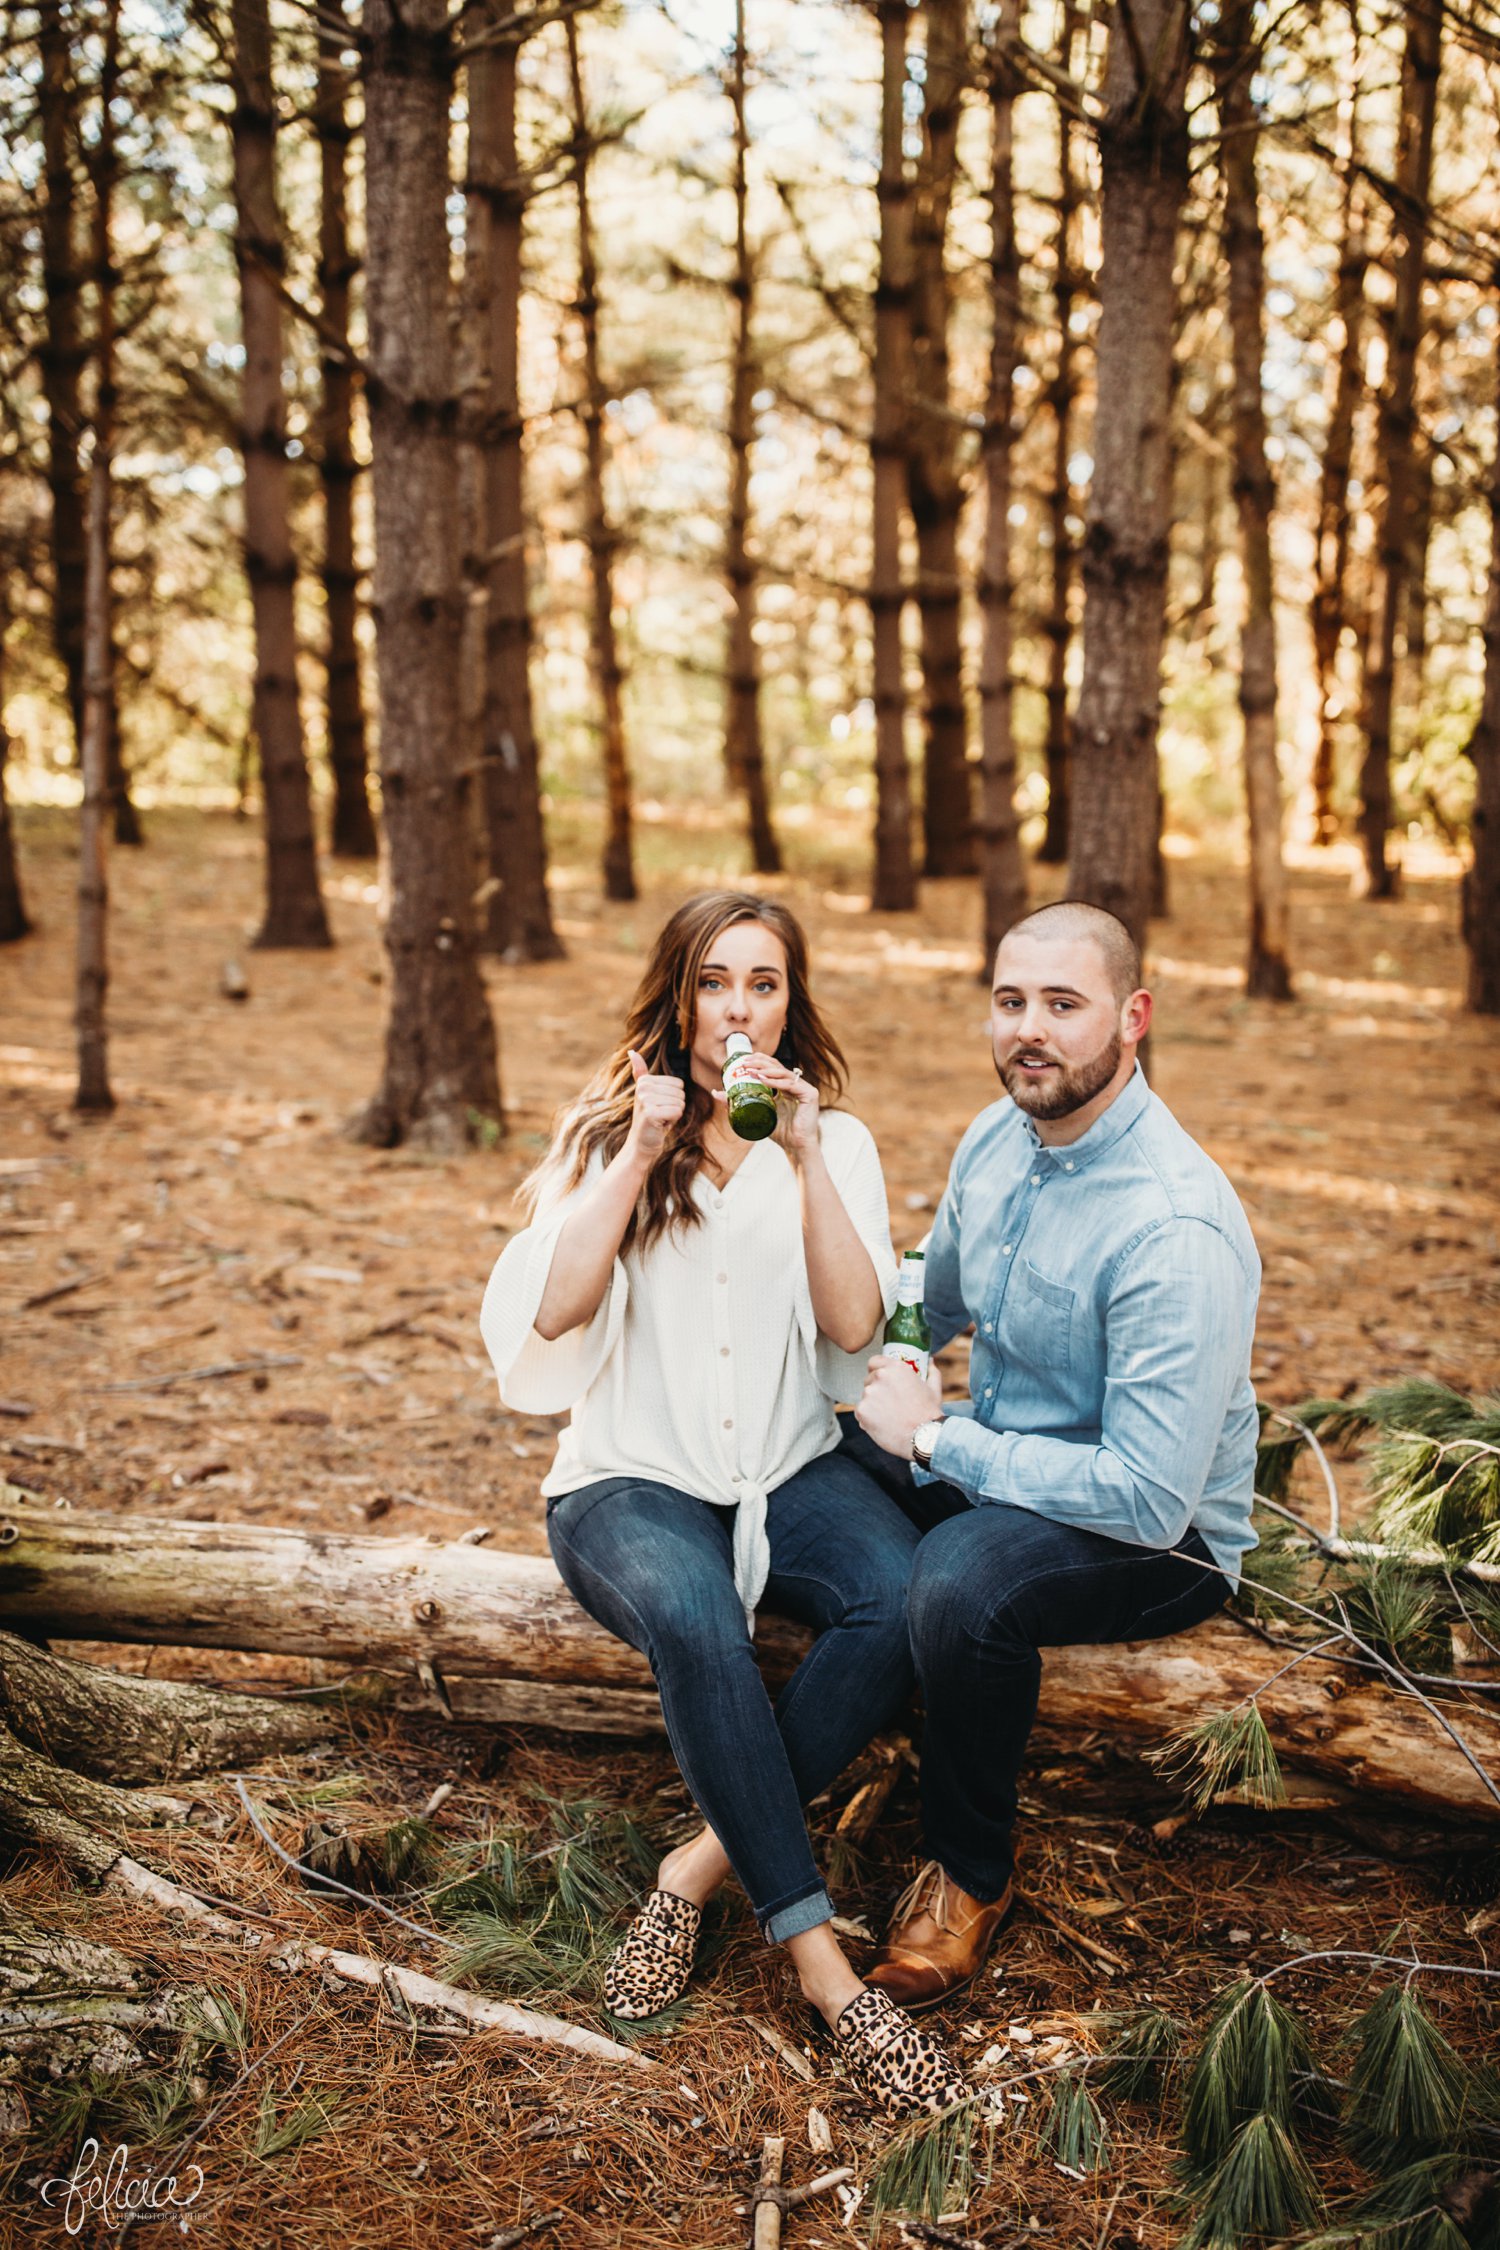 images by feliciathephotographer.com | The Forest | engagement photos | wedding photographer | engagement photographer | forest | sunrise | thumbs up | cheetah print | shoes | brown | blue jeans | beer | drink | drinking | candid | 